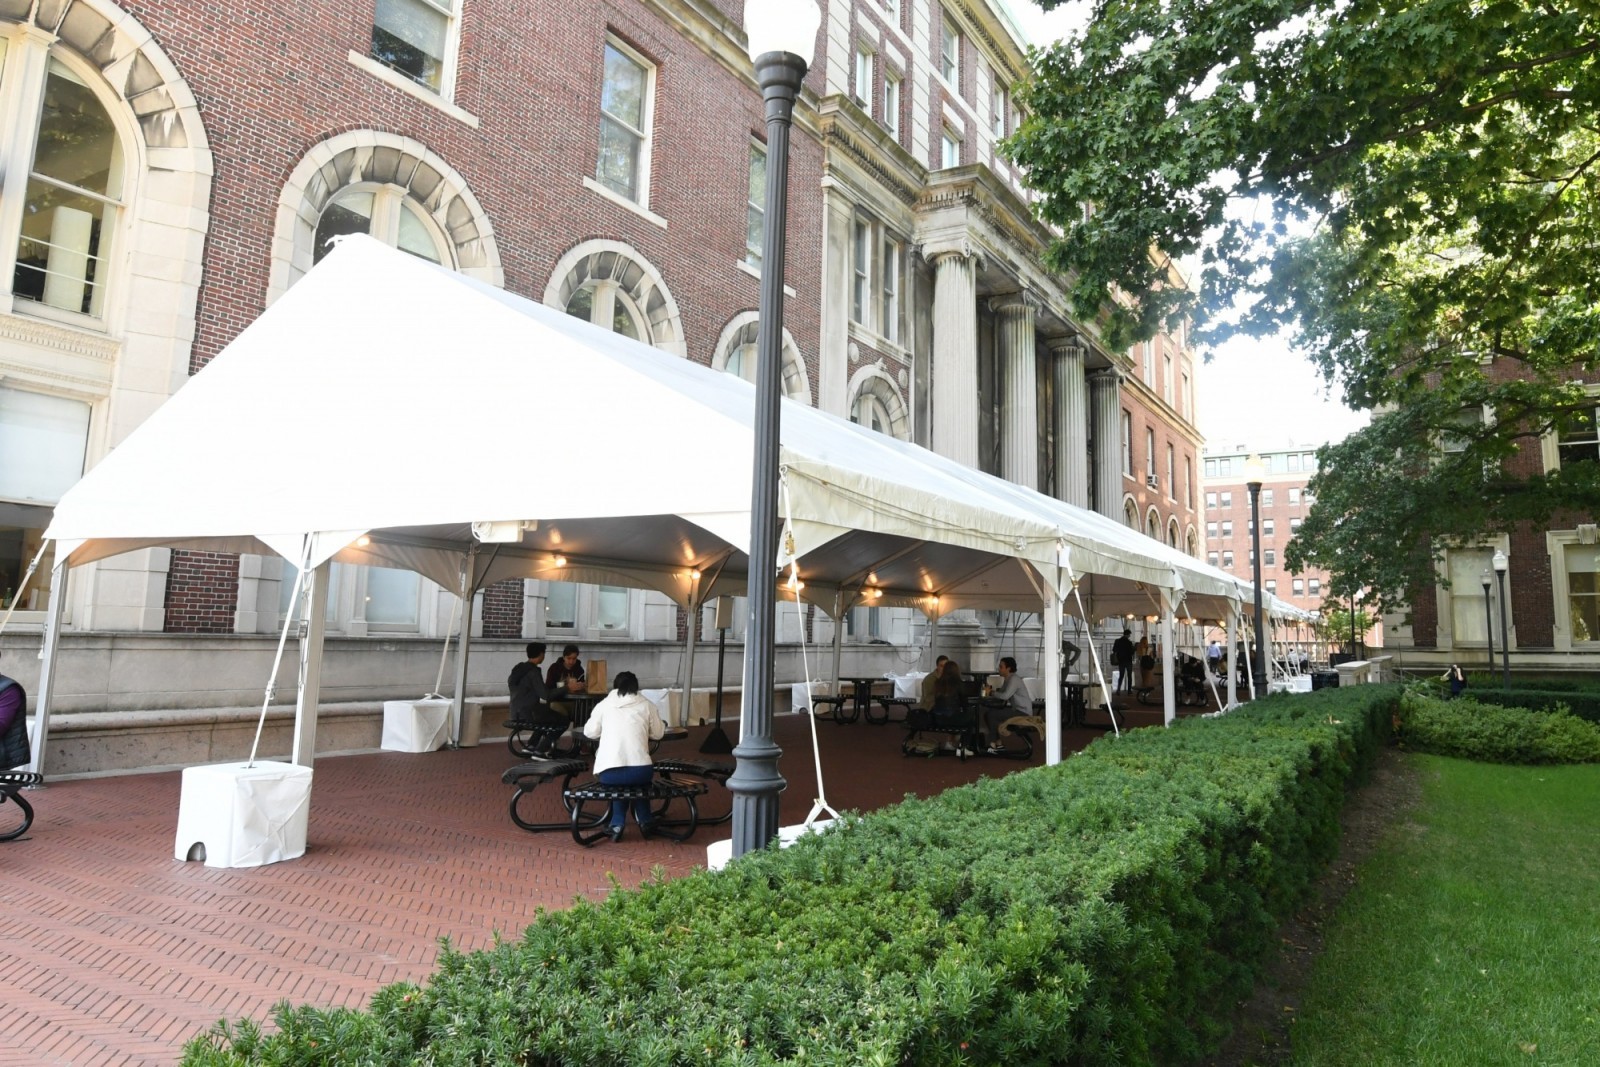 A large, white tent outside of Dodge Hall that has students sitting underneath it.